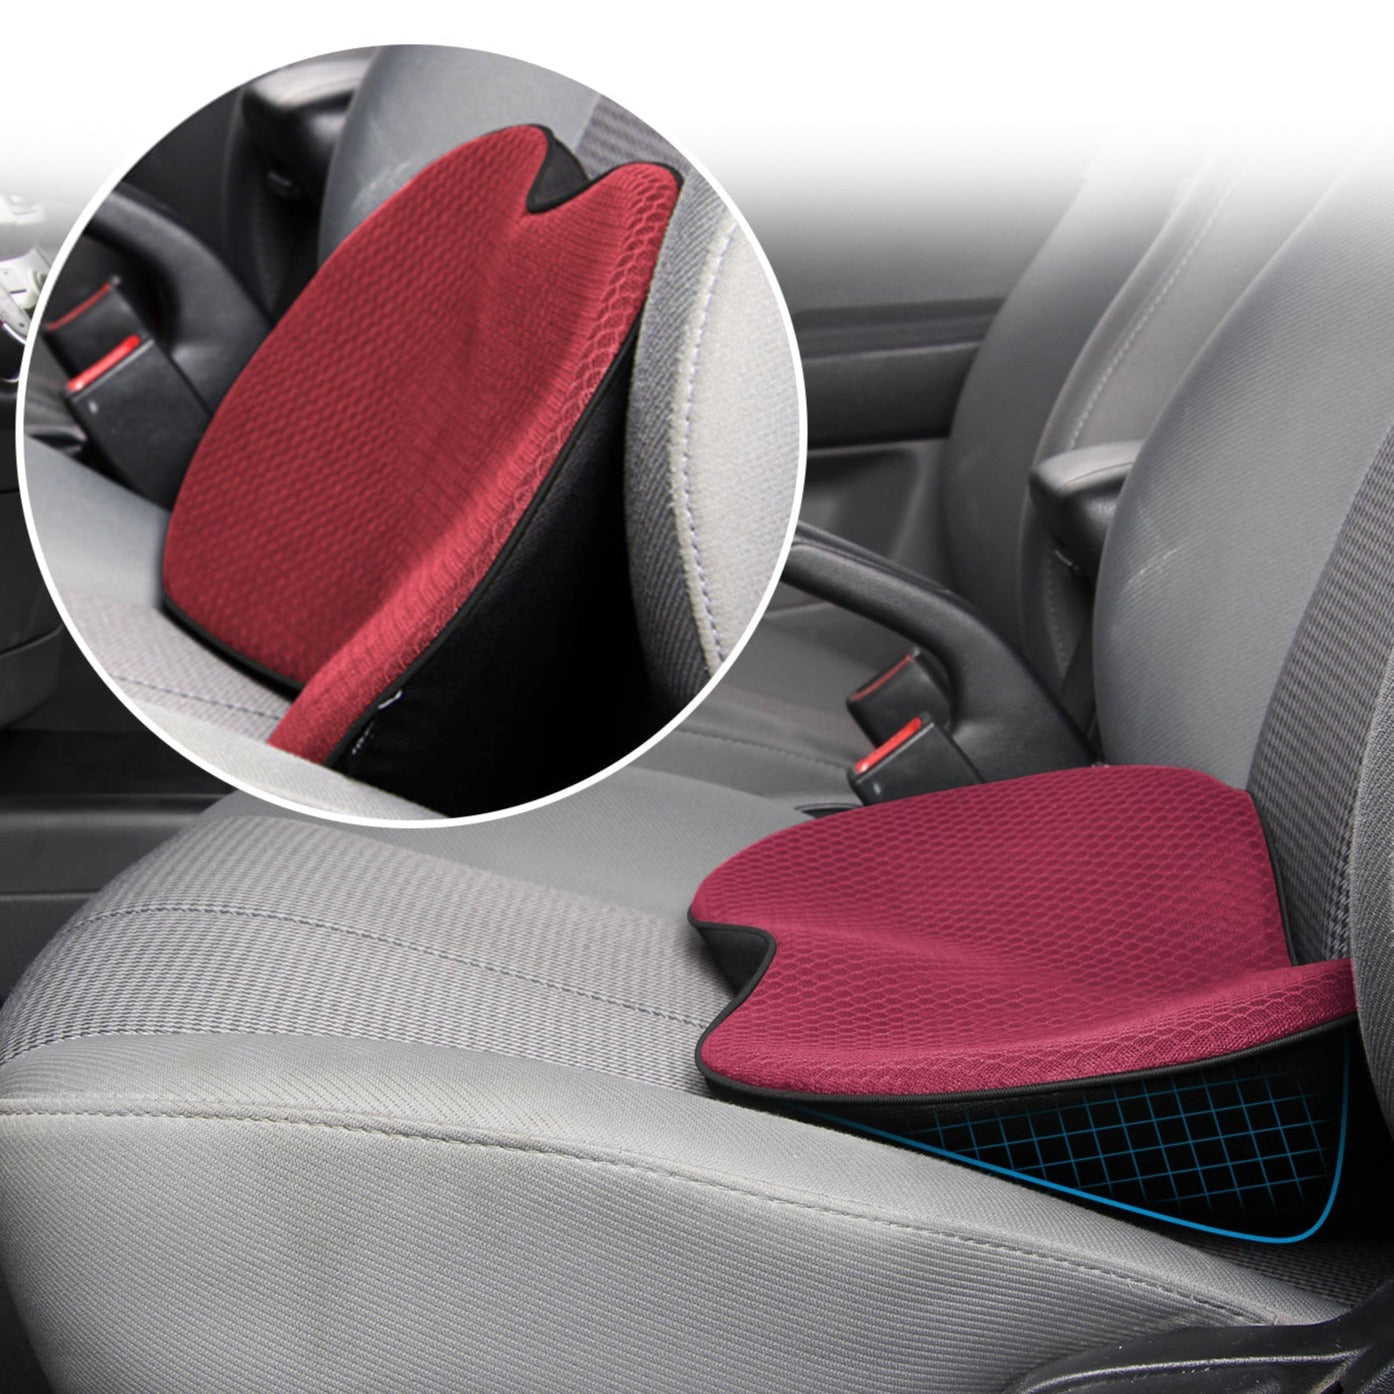 Getphonery Car Seat Cushion for Shorter Drivers Booster Height Riser Adults Short Person Wedge Back Pain Lumbar Support Driving Truck Pillow, Red